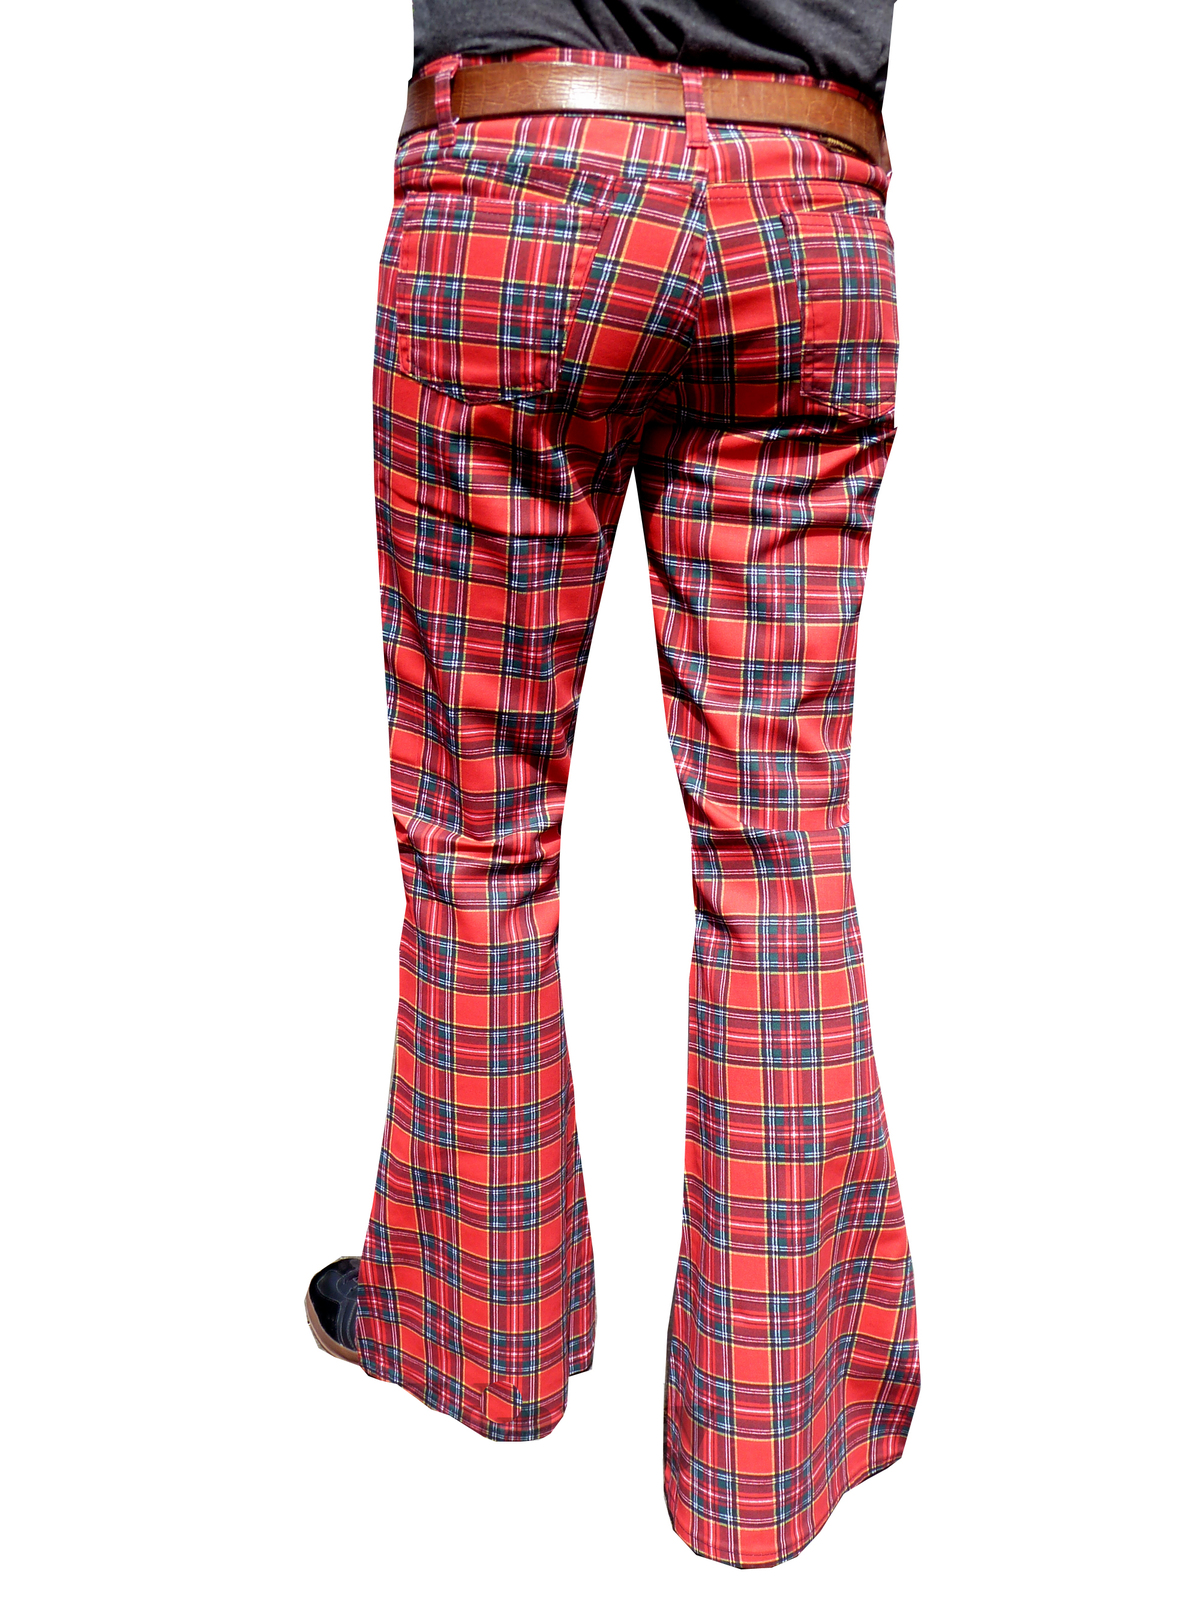 Mens Flares Tartan Red Flared Bell Bottoms Pants Trousers 70s Glam Rock ...